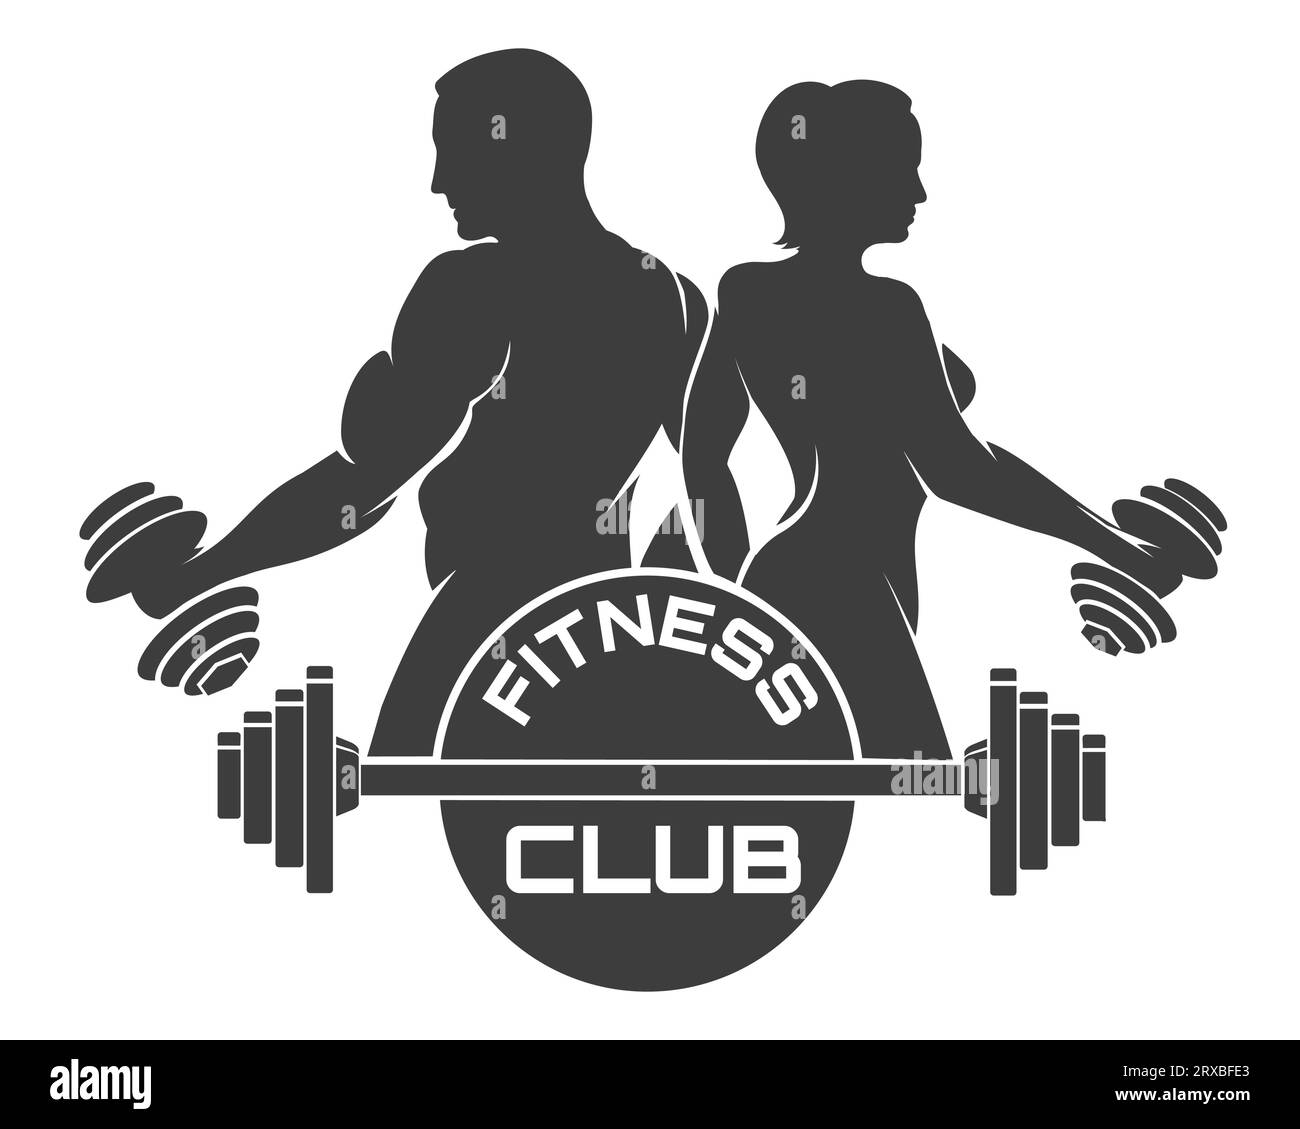 Fitness Club LOGO or Emblem with Bodybuilders and Barbell isolated on white. Vector illustration. Stock Vector